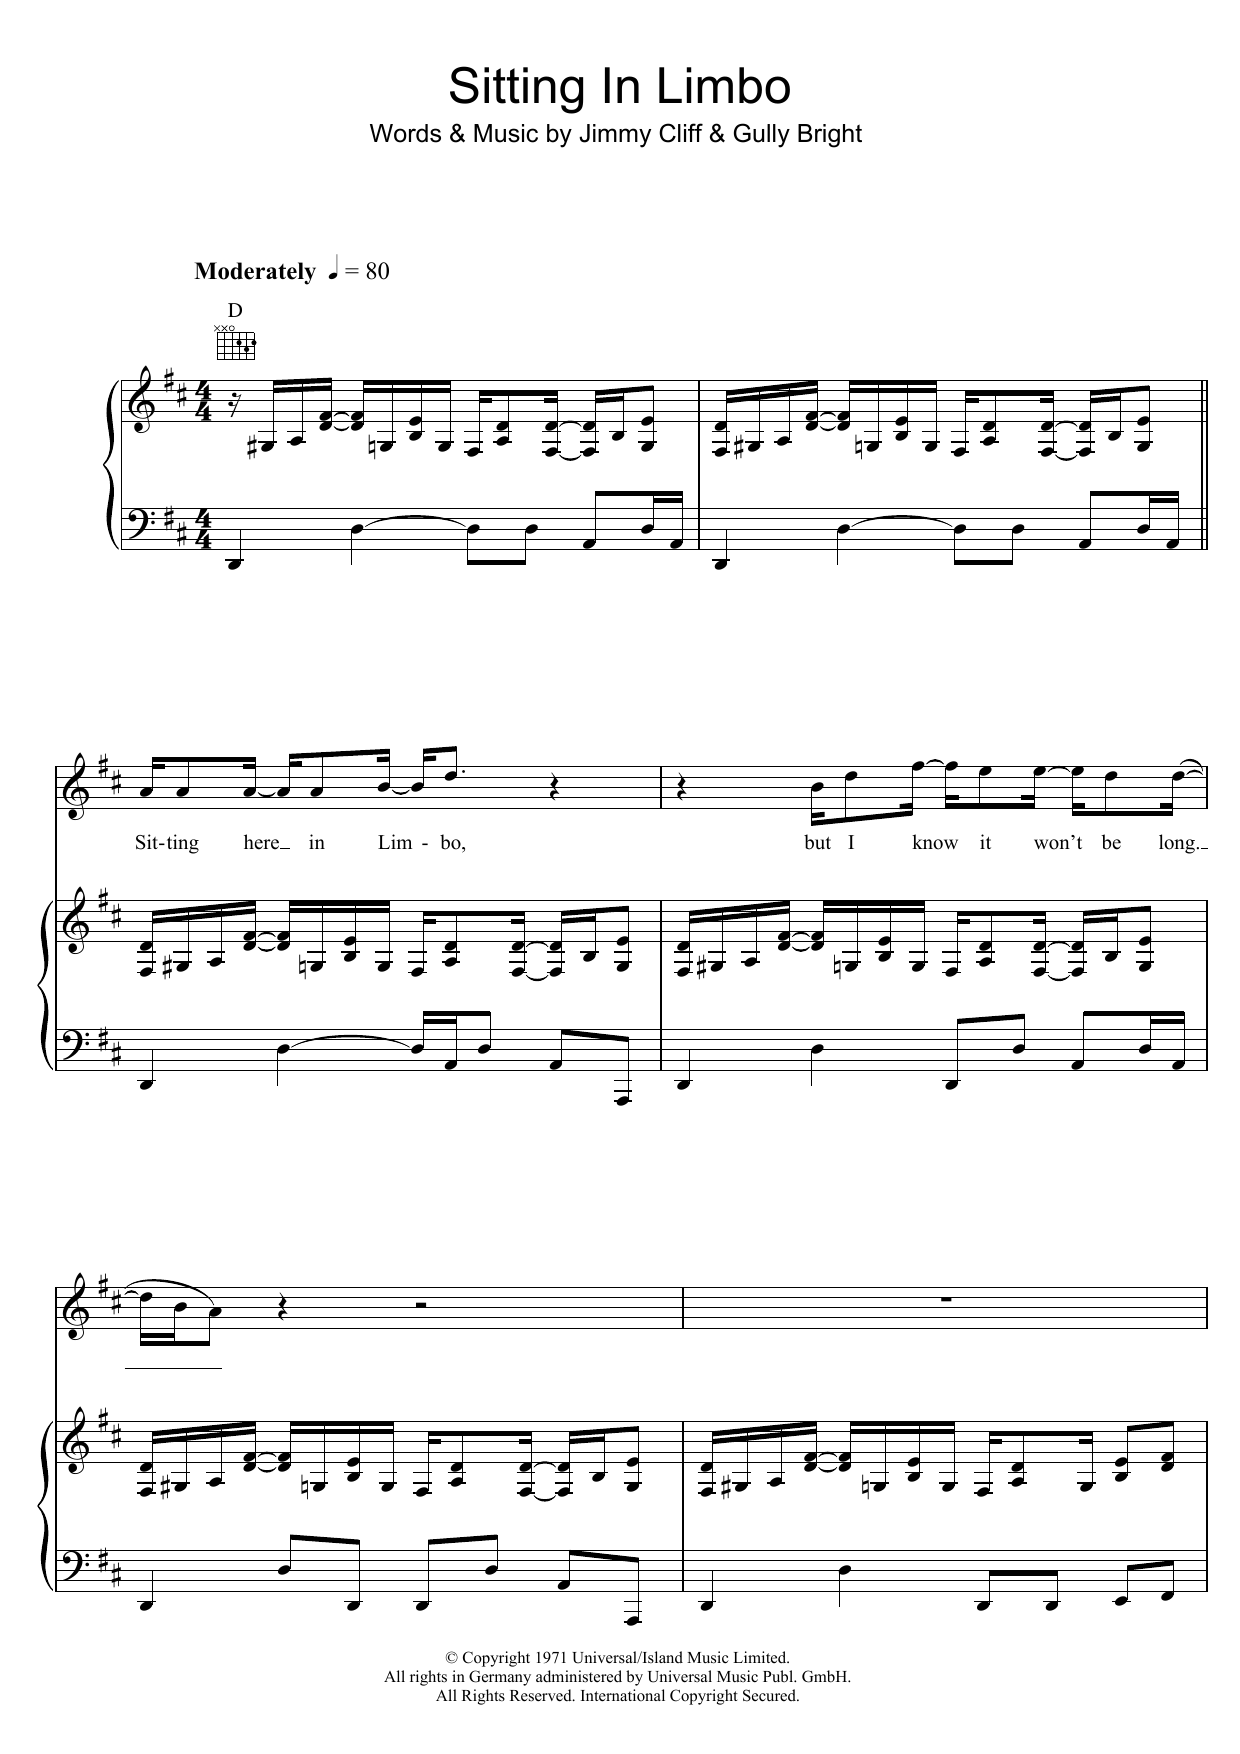 Download Jimmy Cliff Sitting In Limbo Sheet Music